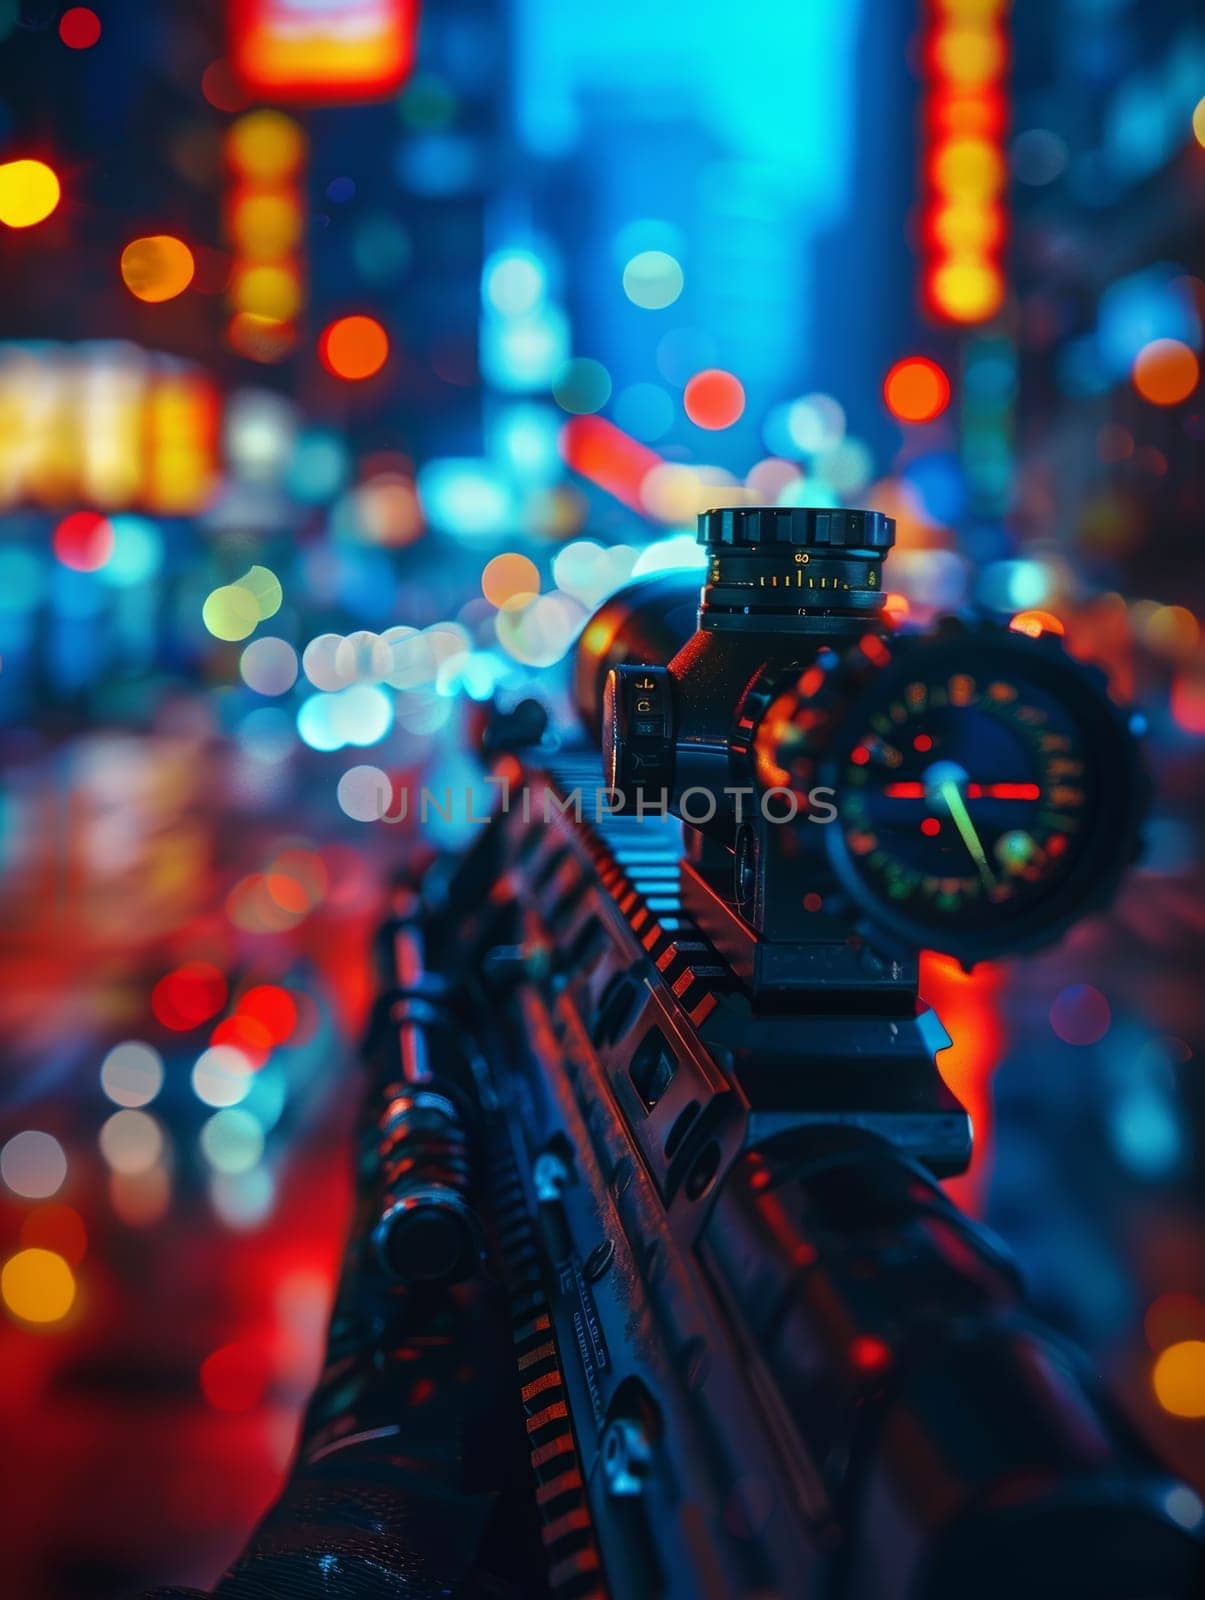 A close-up view of a tactical firearm's digital interface, encased in a striking neon-colored frame against a blurred, electrified city backdrop. by sfinks